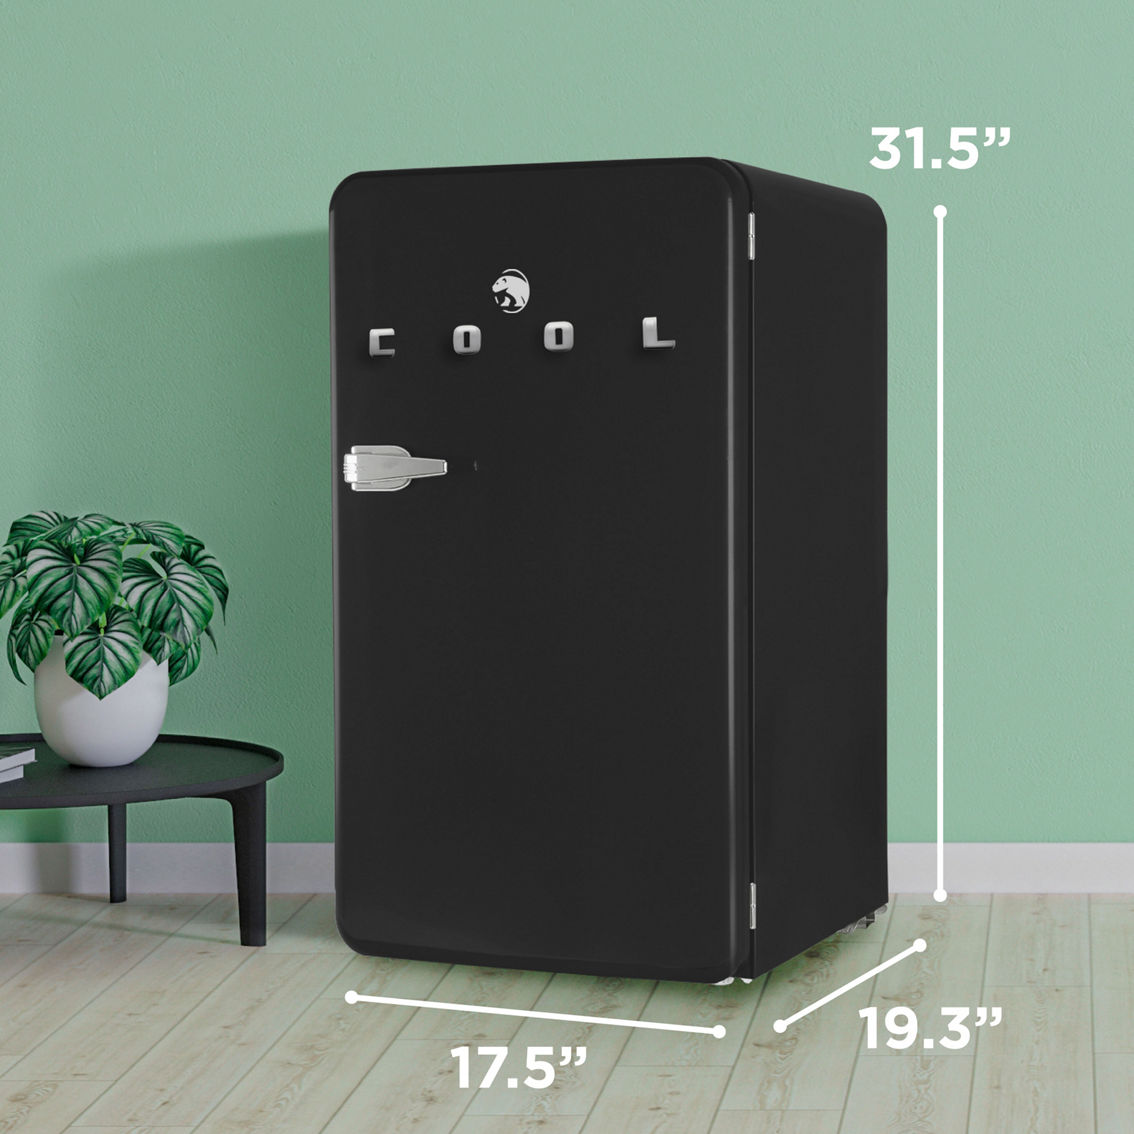 Commercial Cool 3.2 Cubic Foot Retro Refrigerator - Image 2 of 7